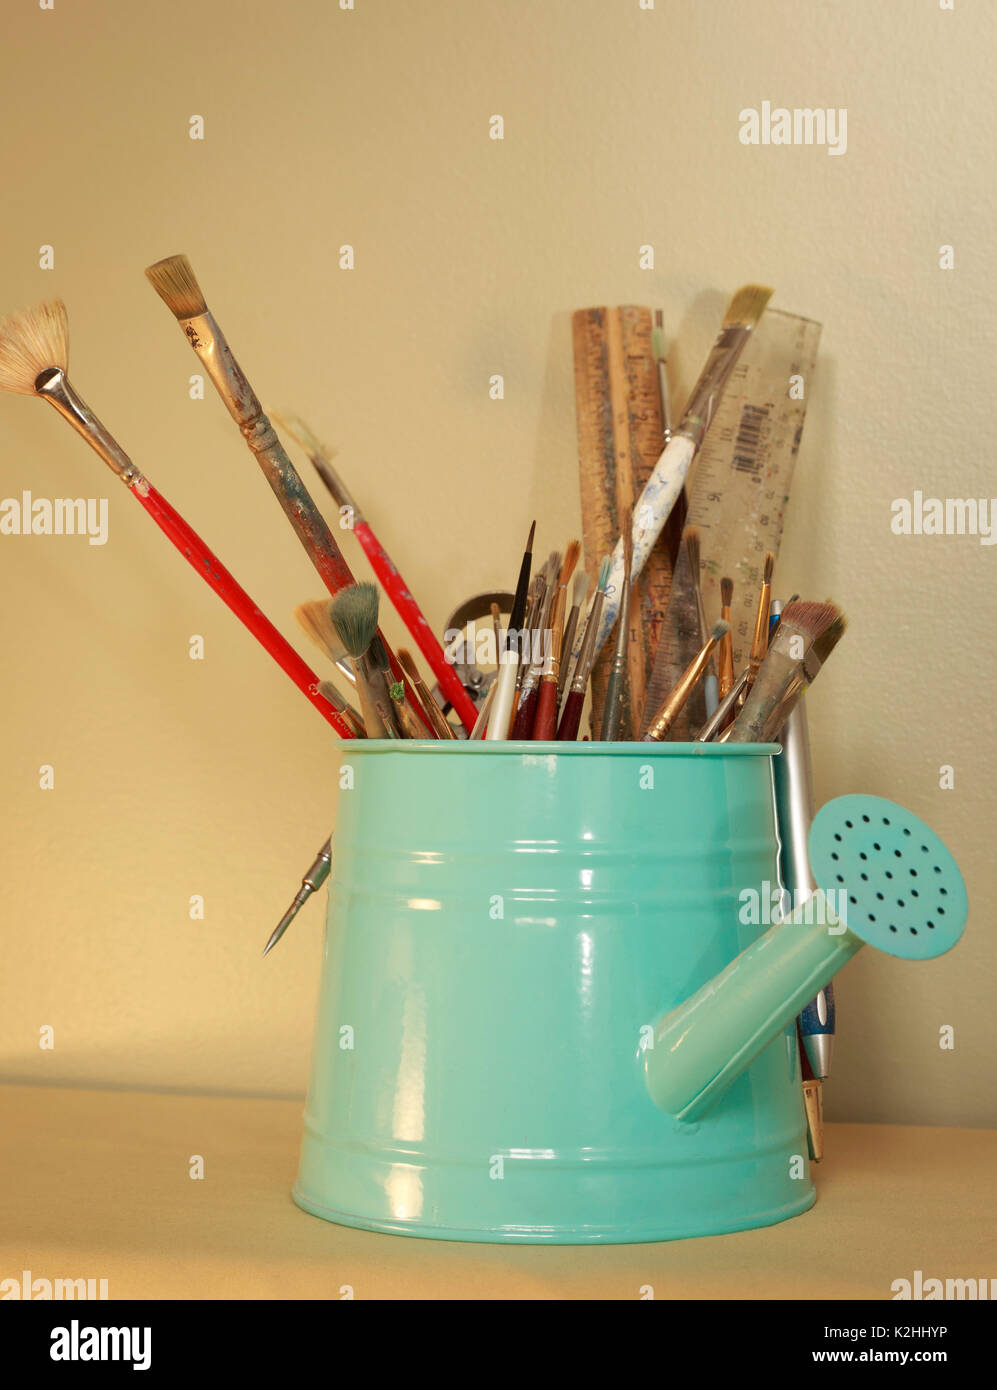 Turquoise container holding art supplies Stock Photo